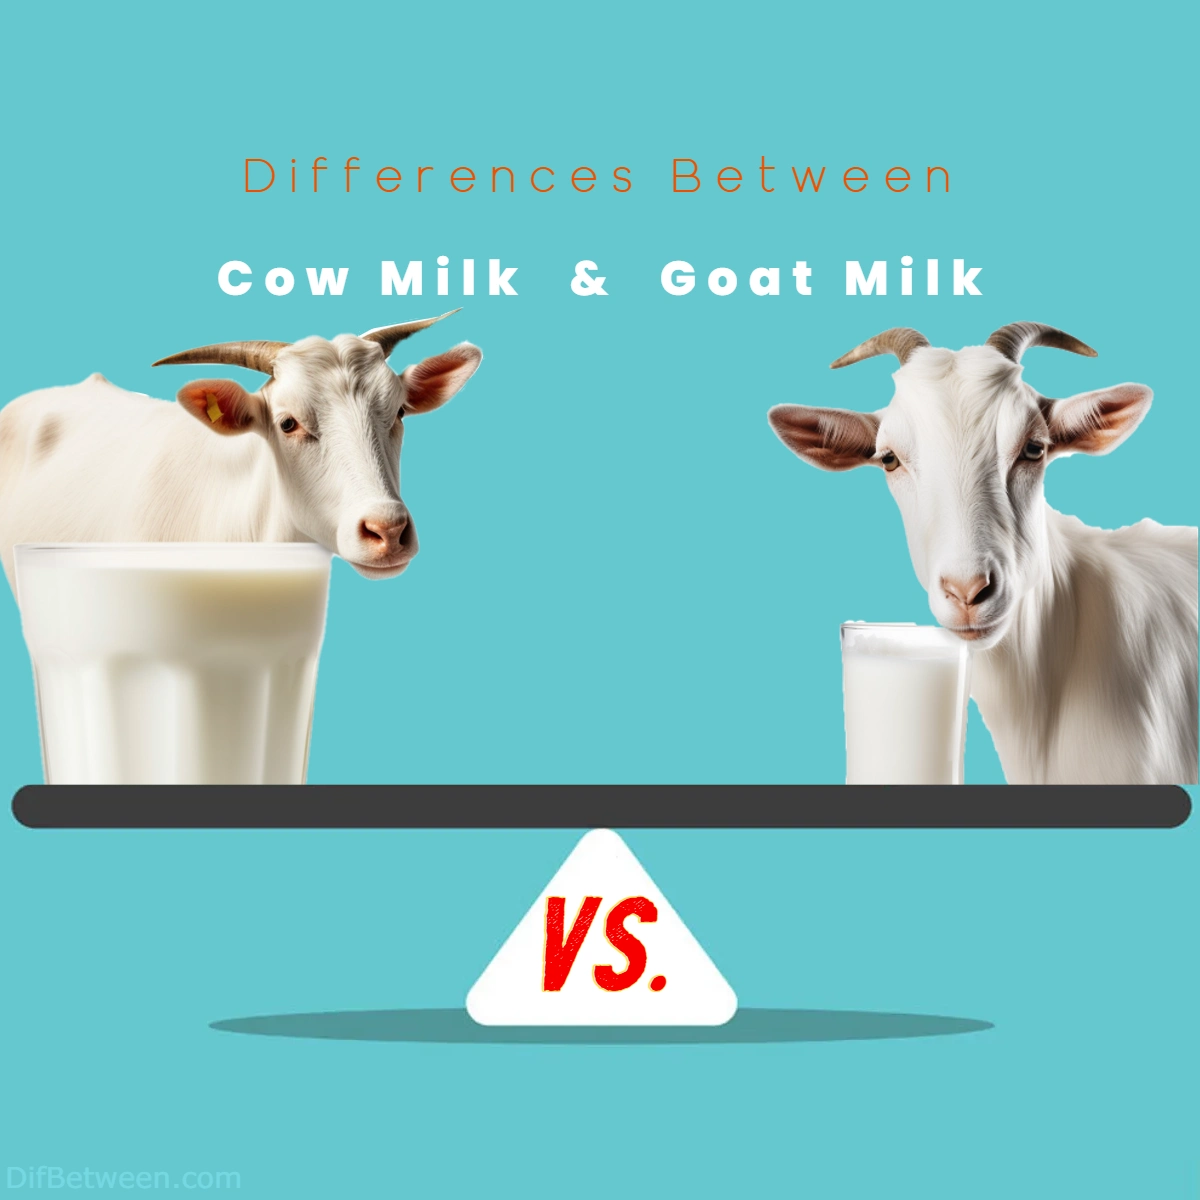 Differences Between Cow Milk and Goat Milk